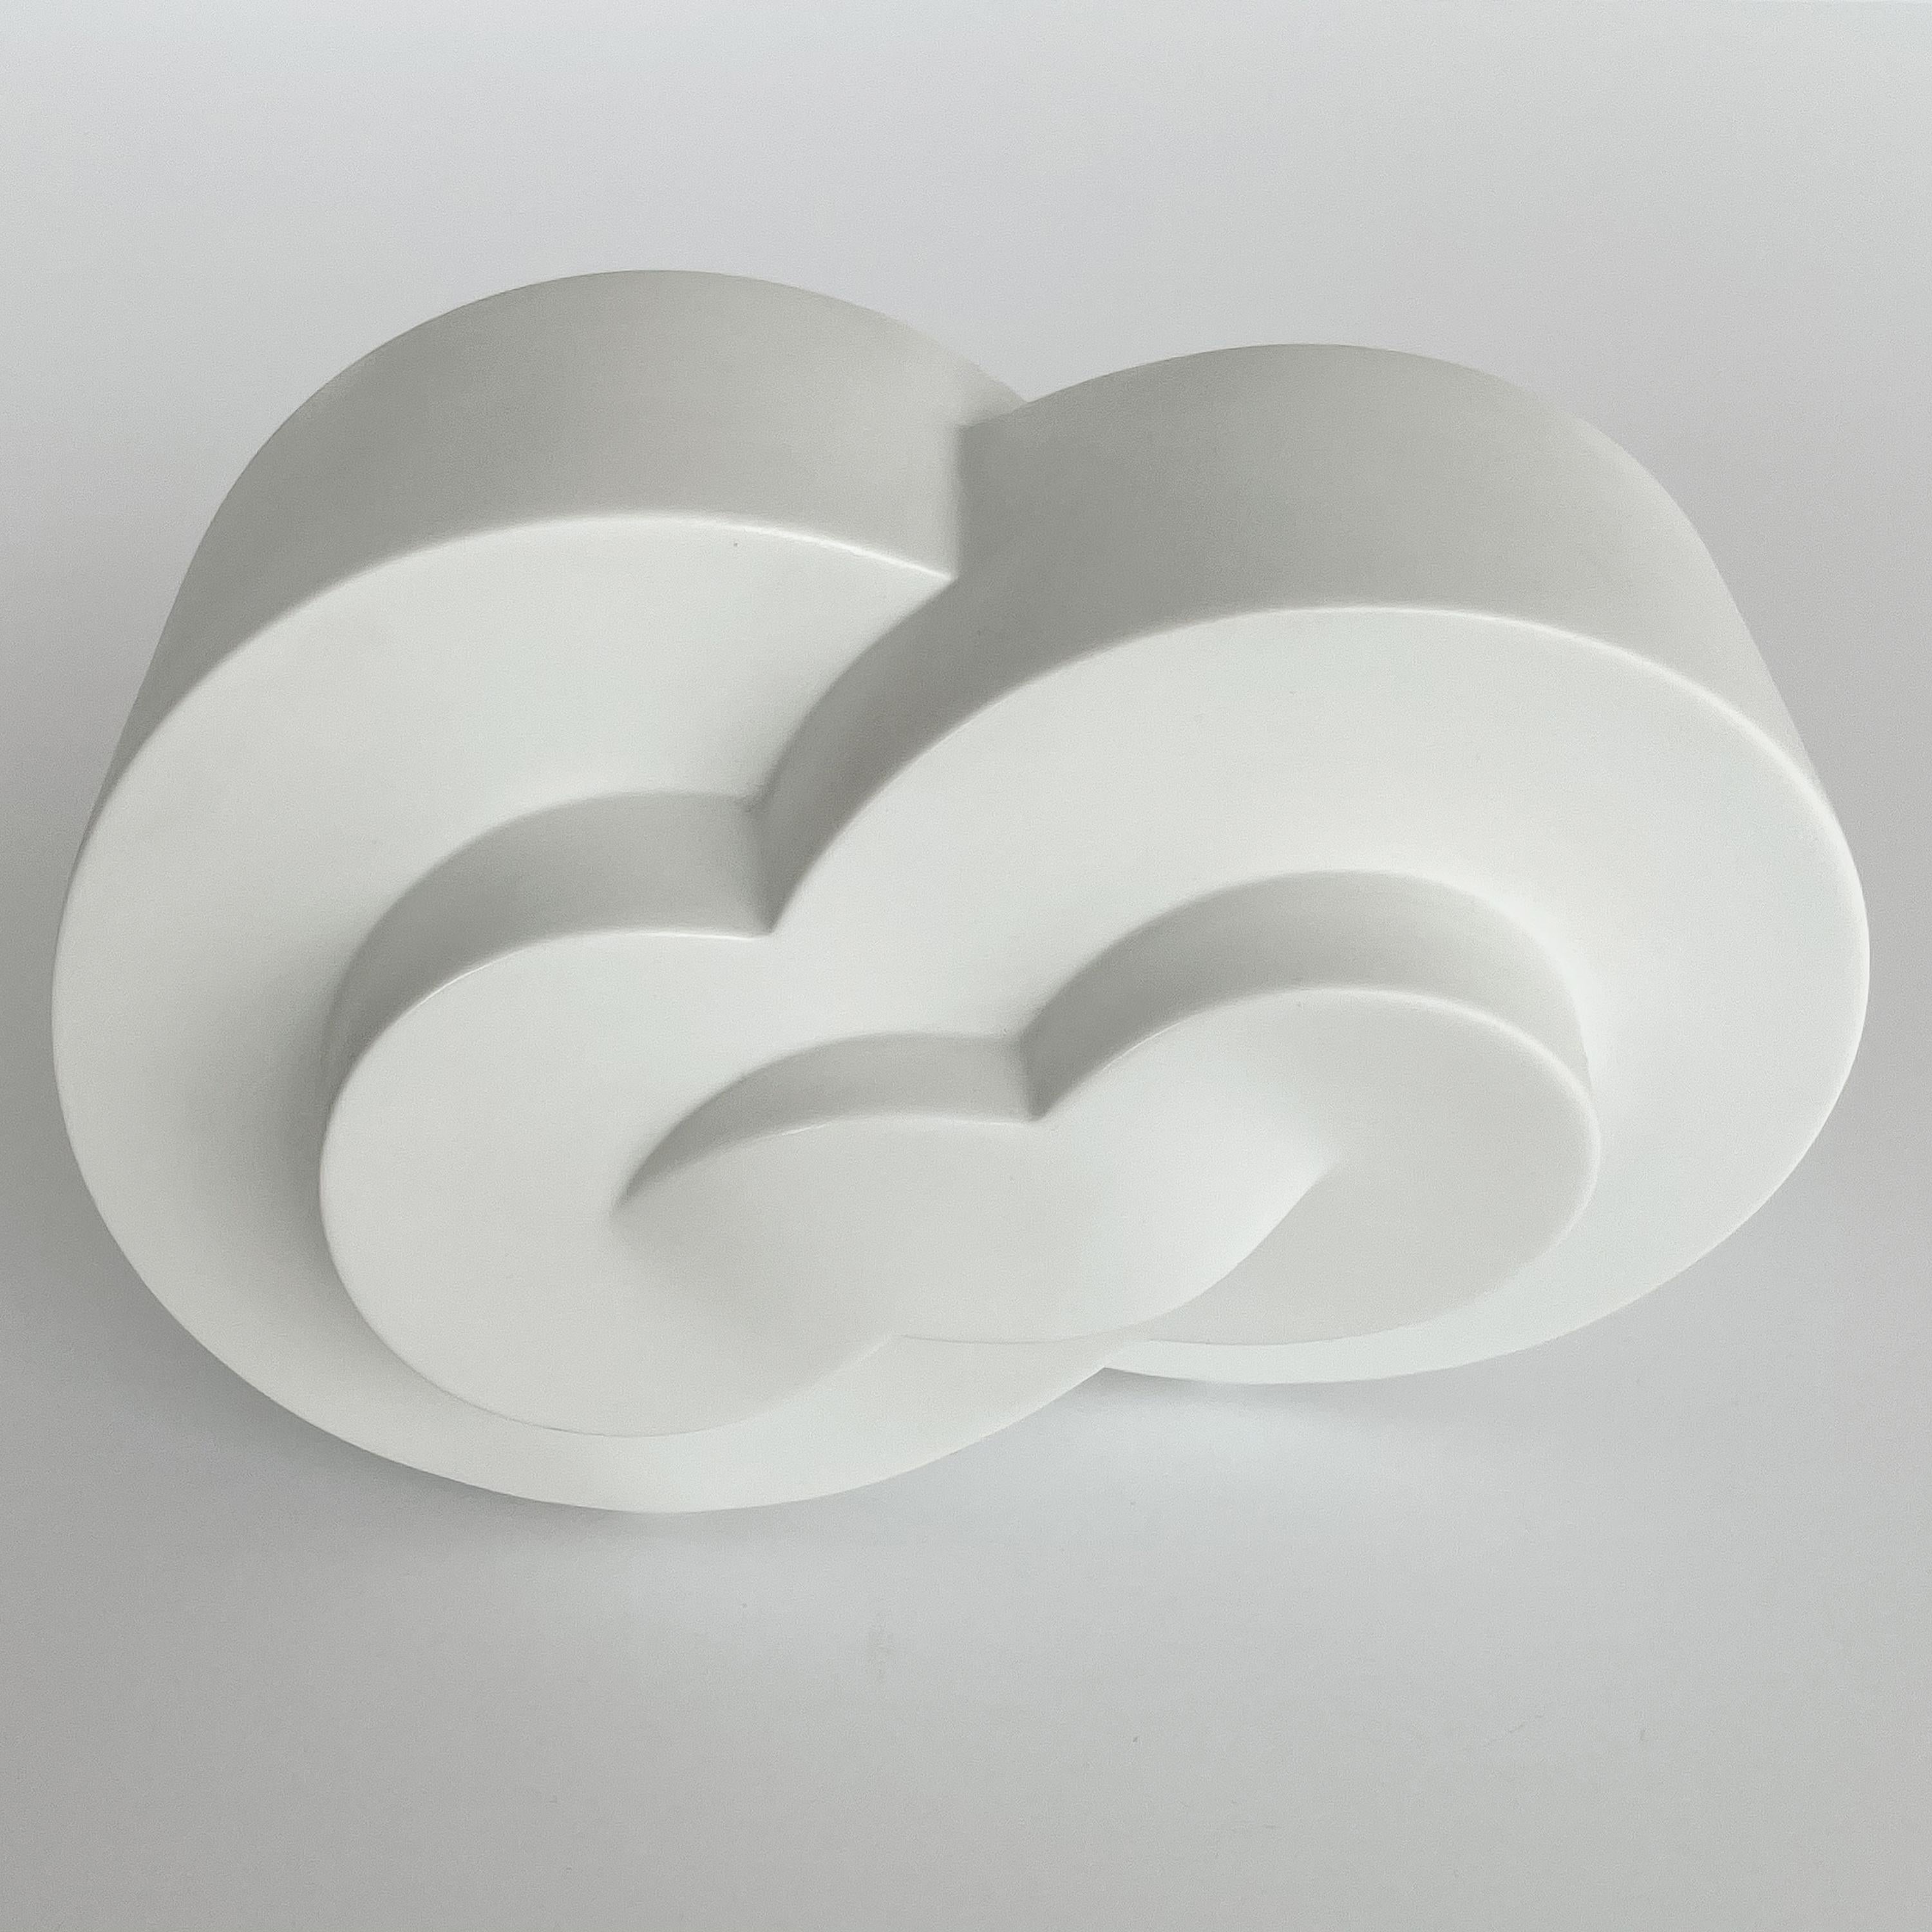 Natale Sapone Abstract Porcelain Sculpture for Rosenthal 3